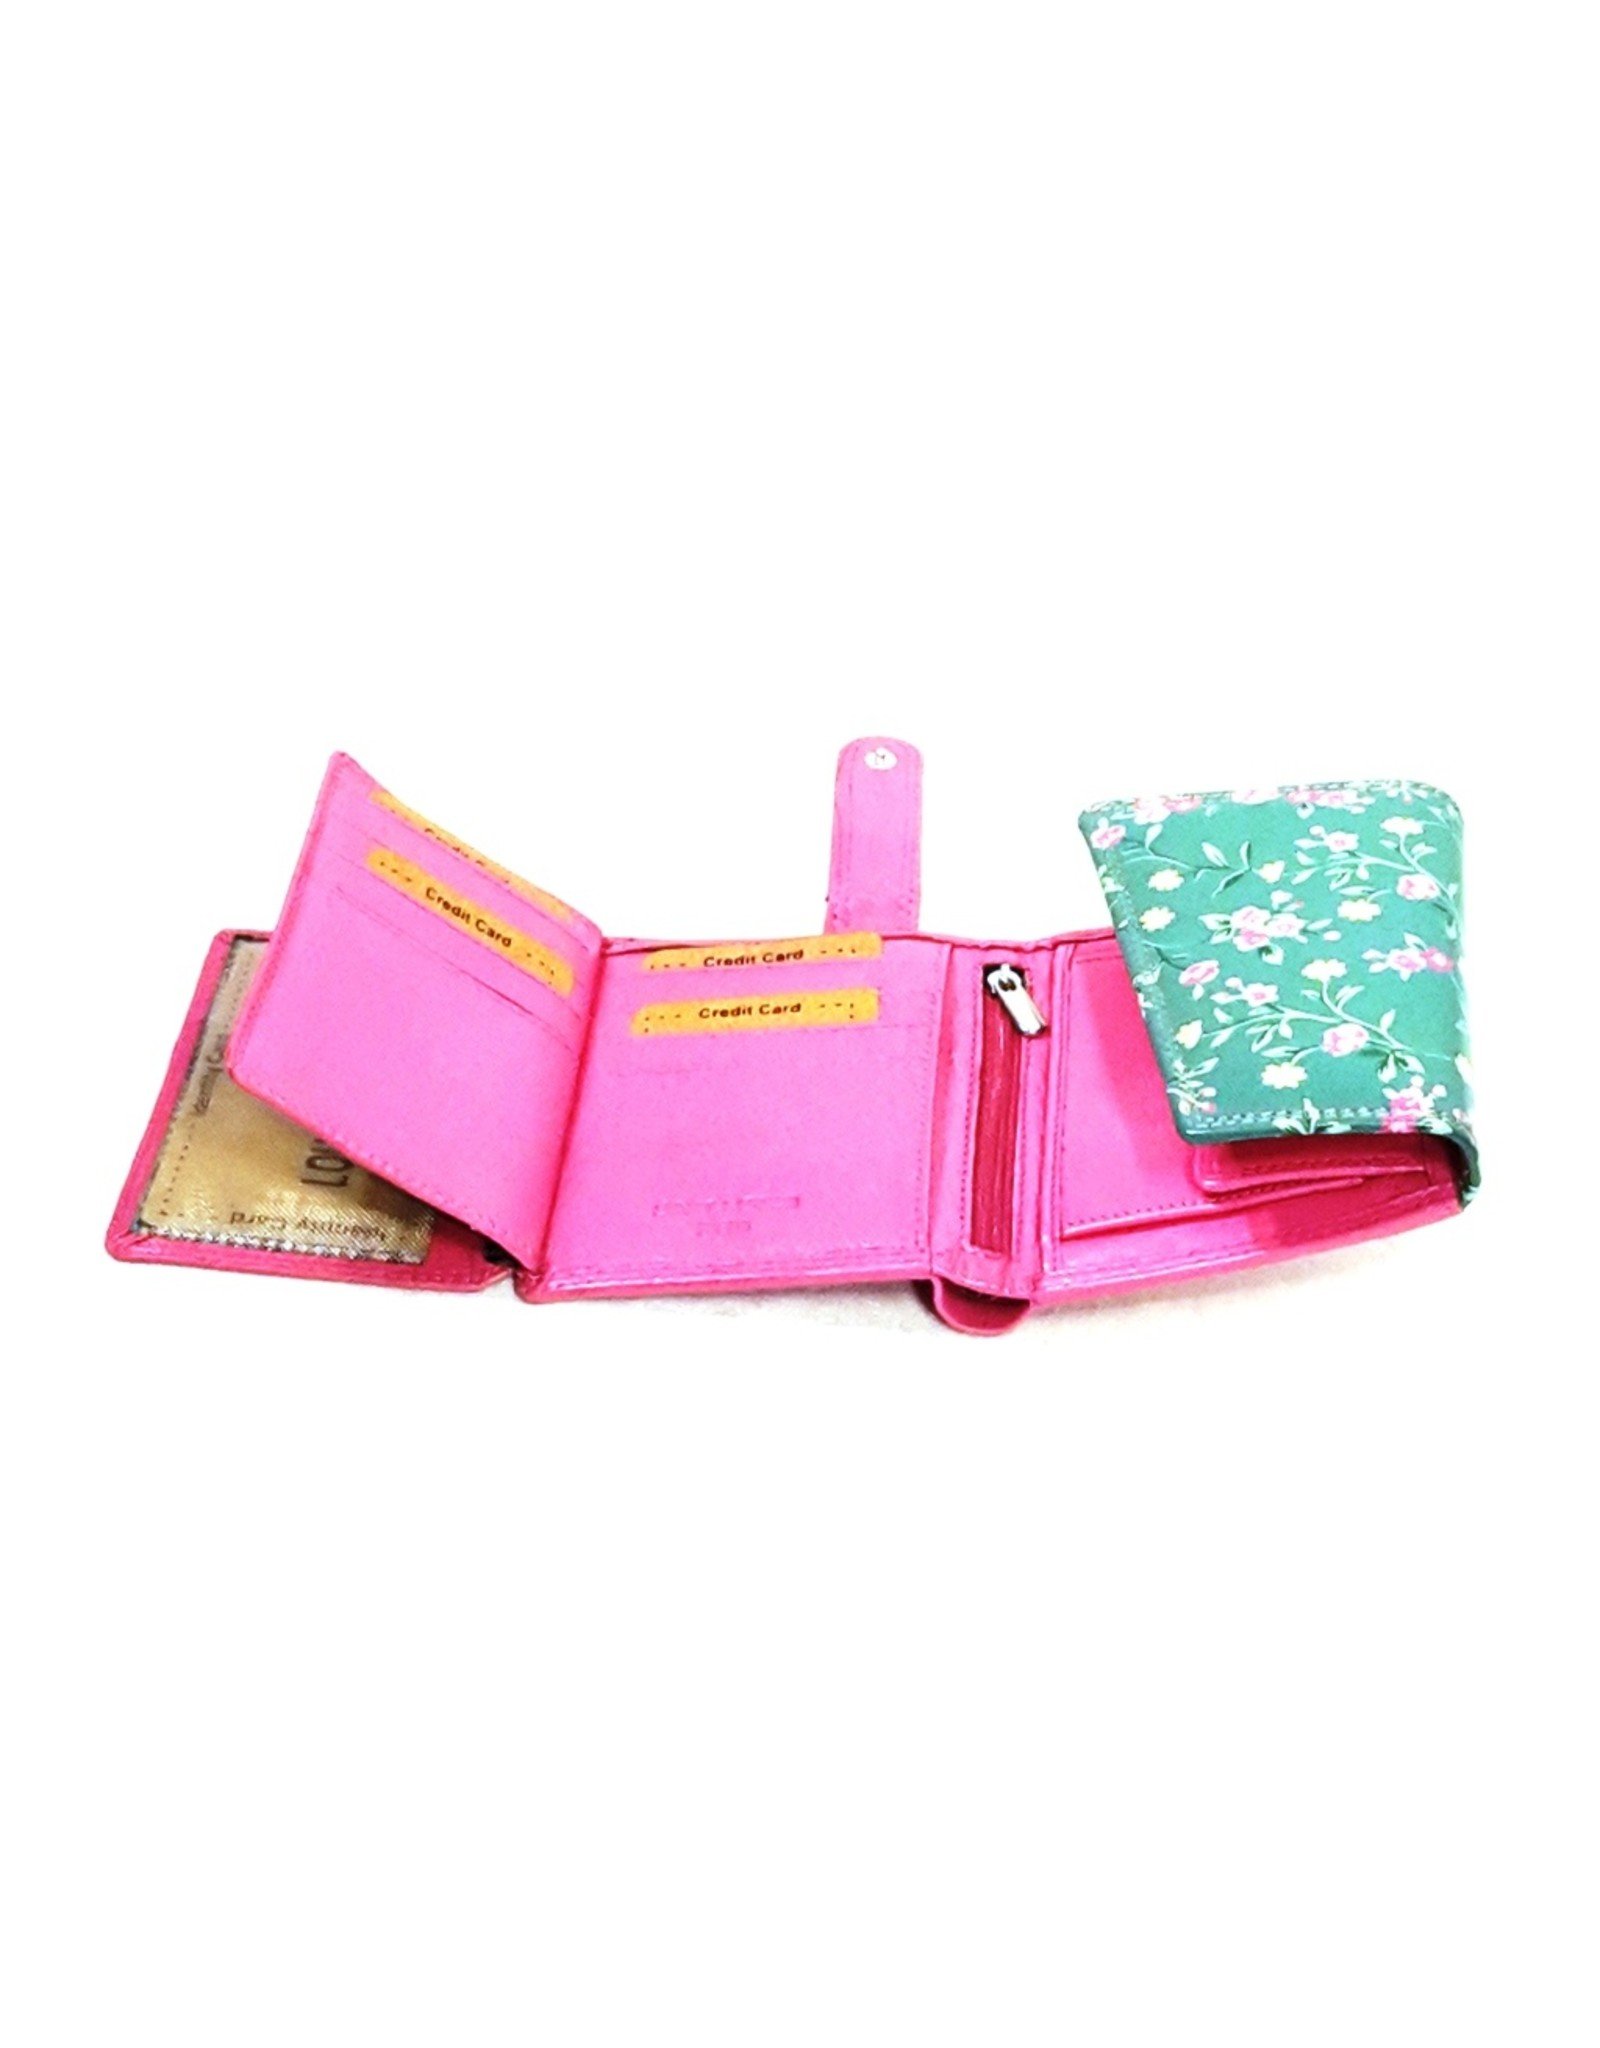 Louis Wallis Leather Wallets -  Leather wallet with floral print on the cover (fuchsia-green)